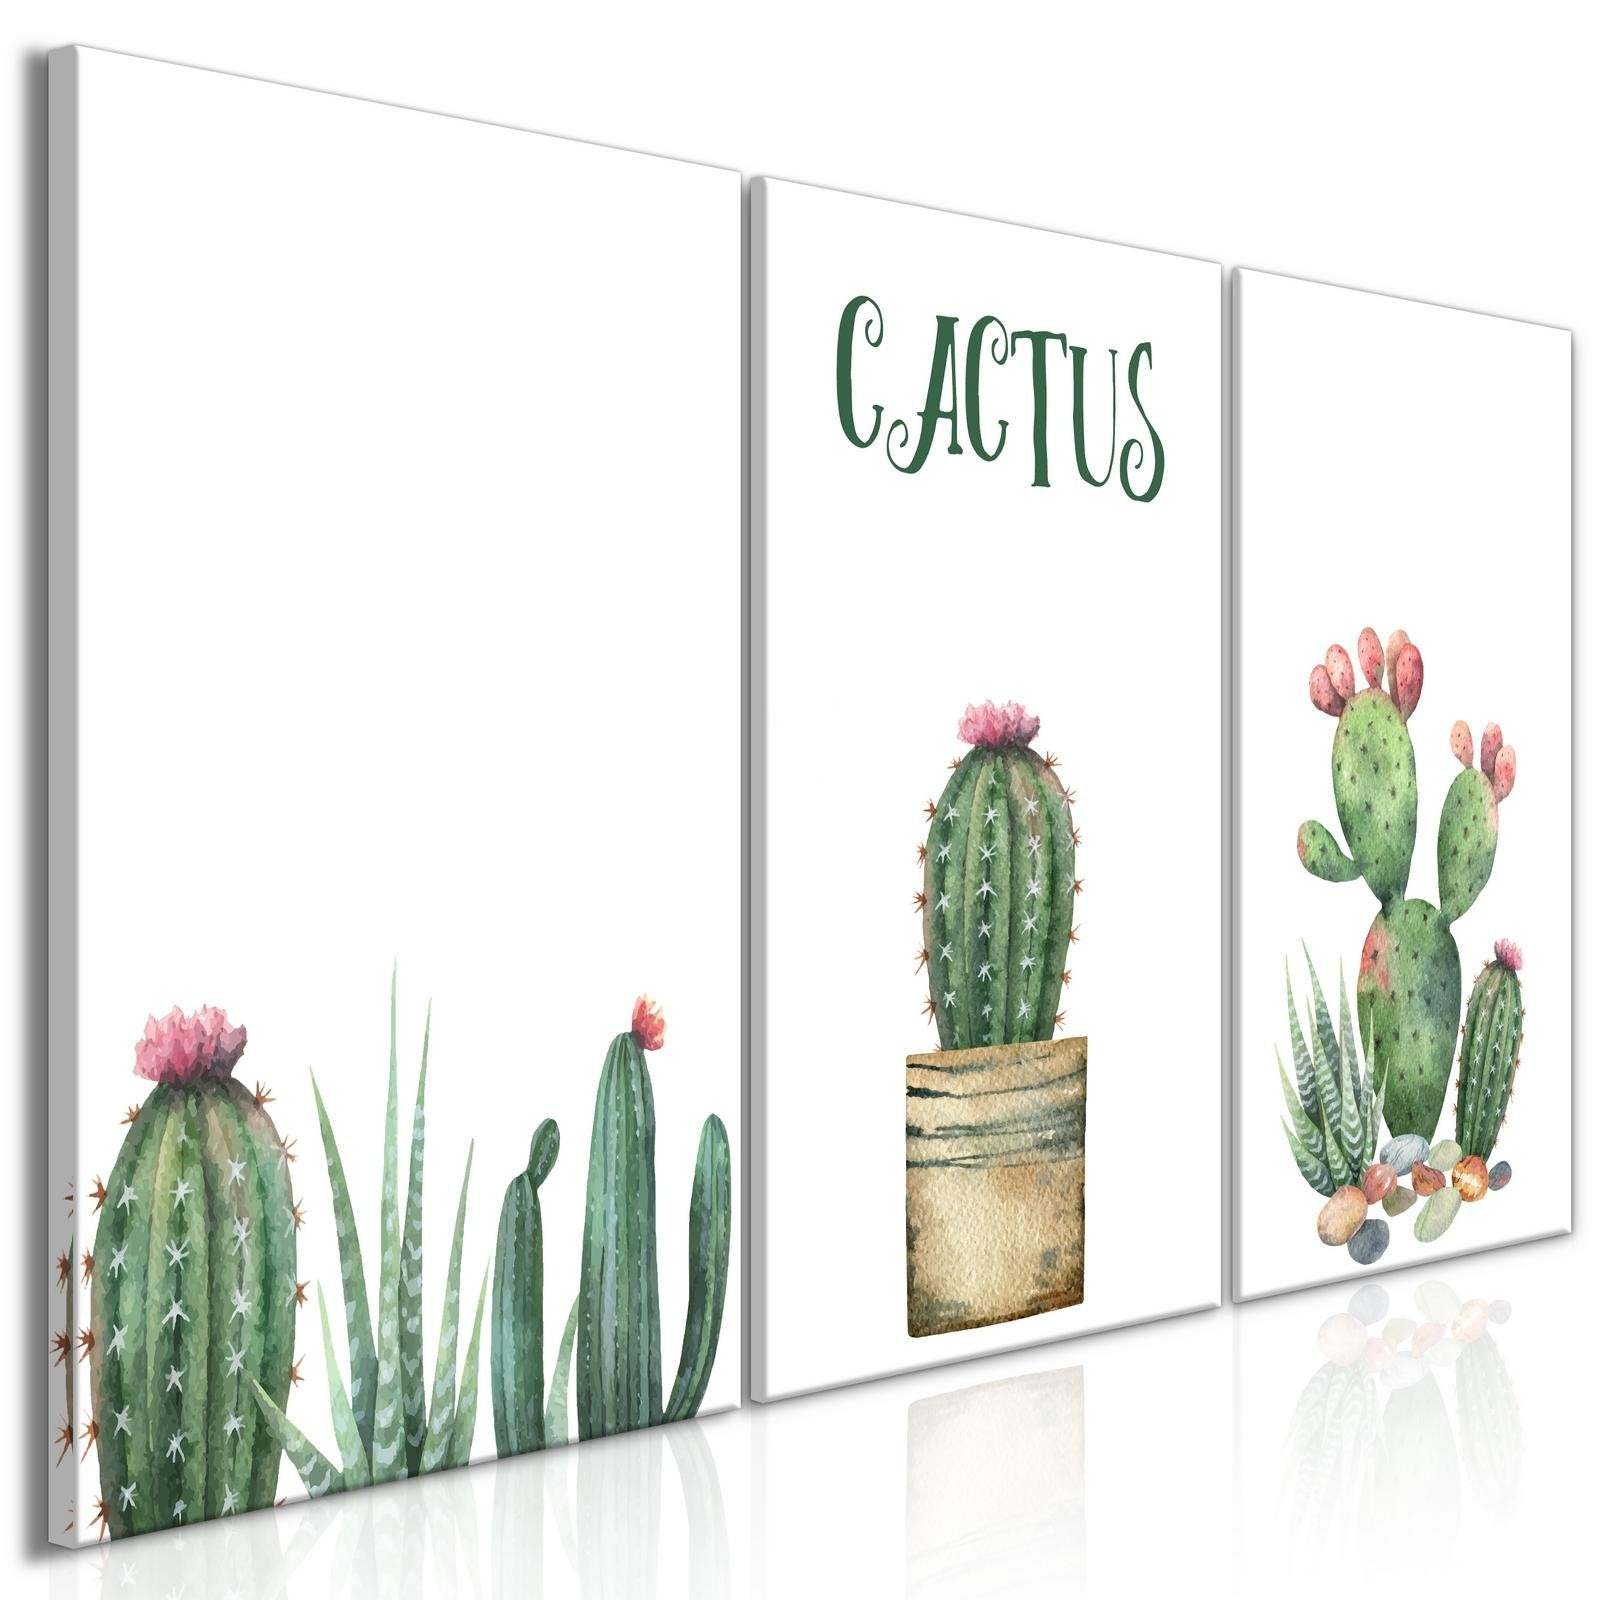 Tiptophomedecor Stretched Canvas Botanical Art - Prickly Flowers - Stretched & F - $99.99